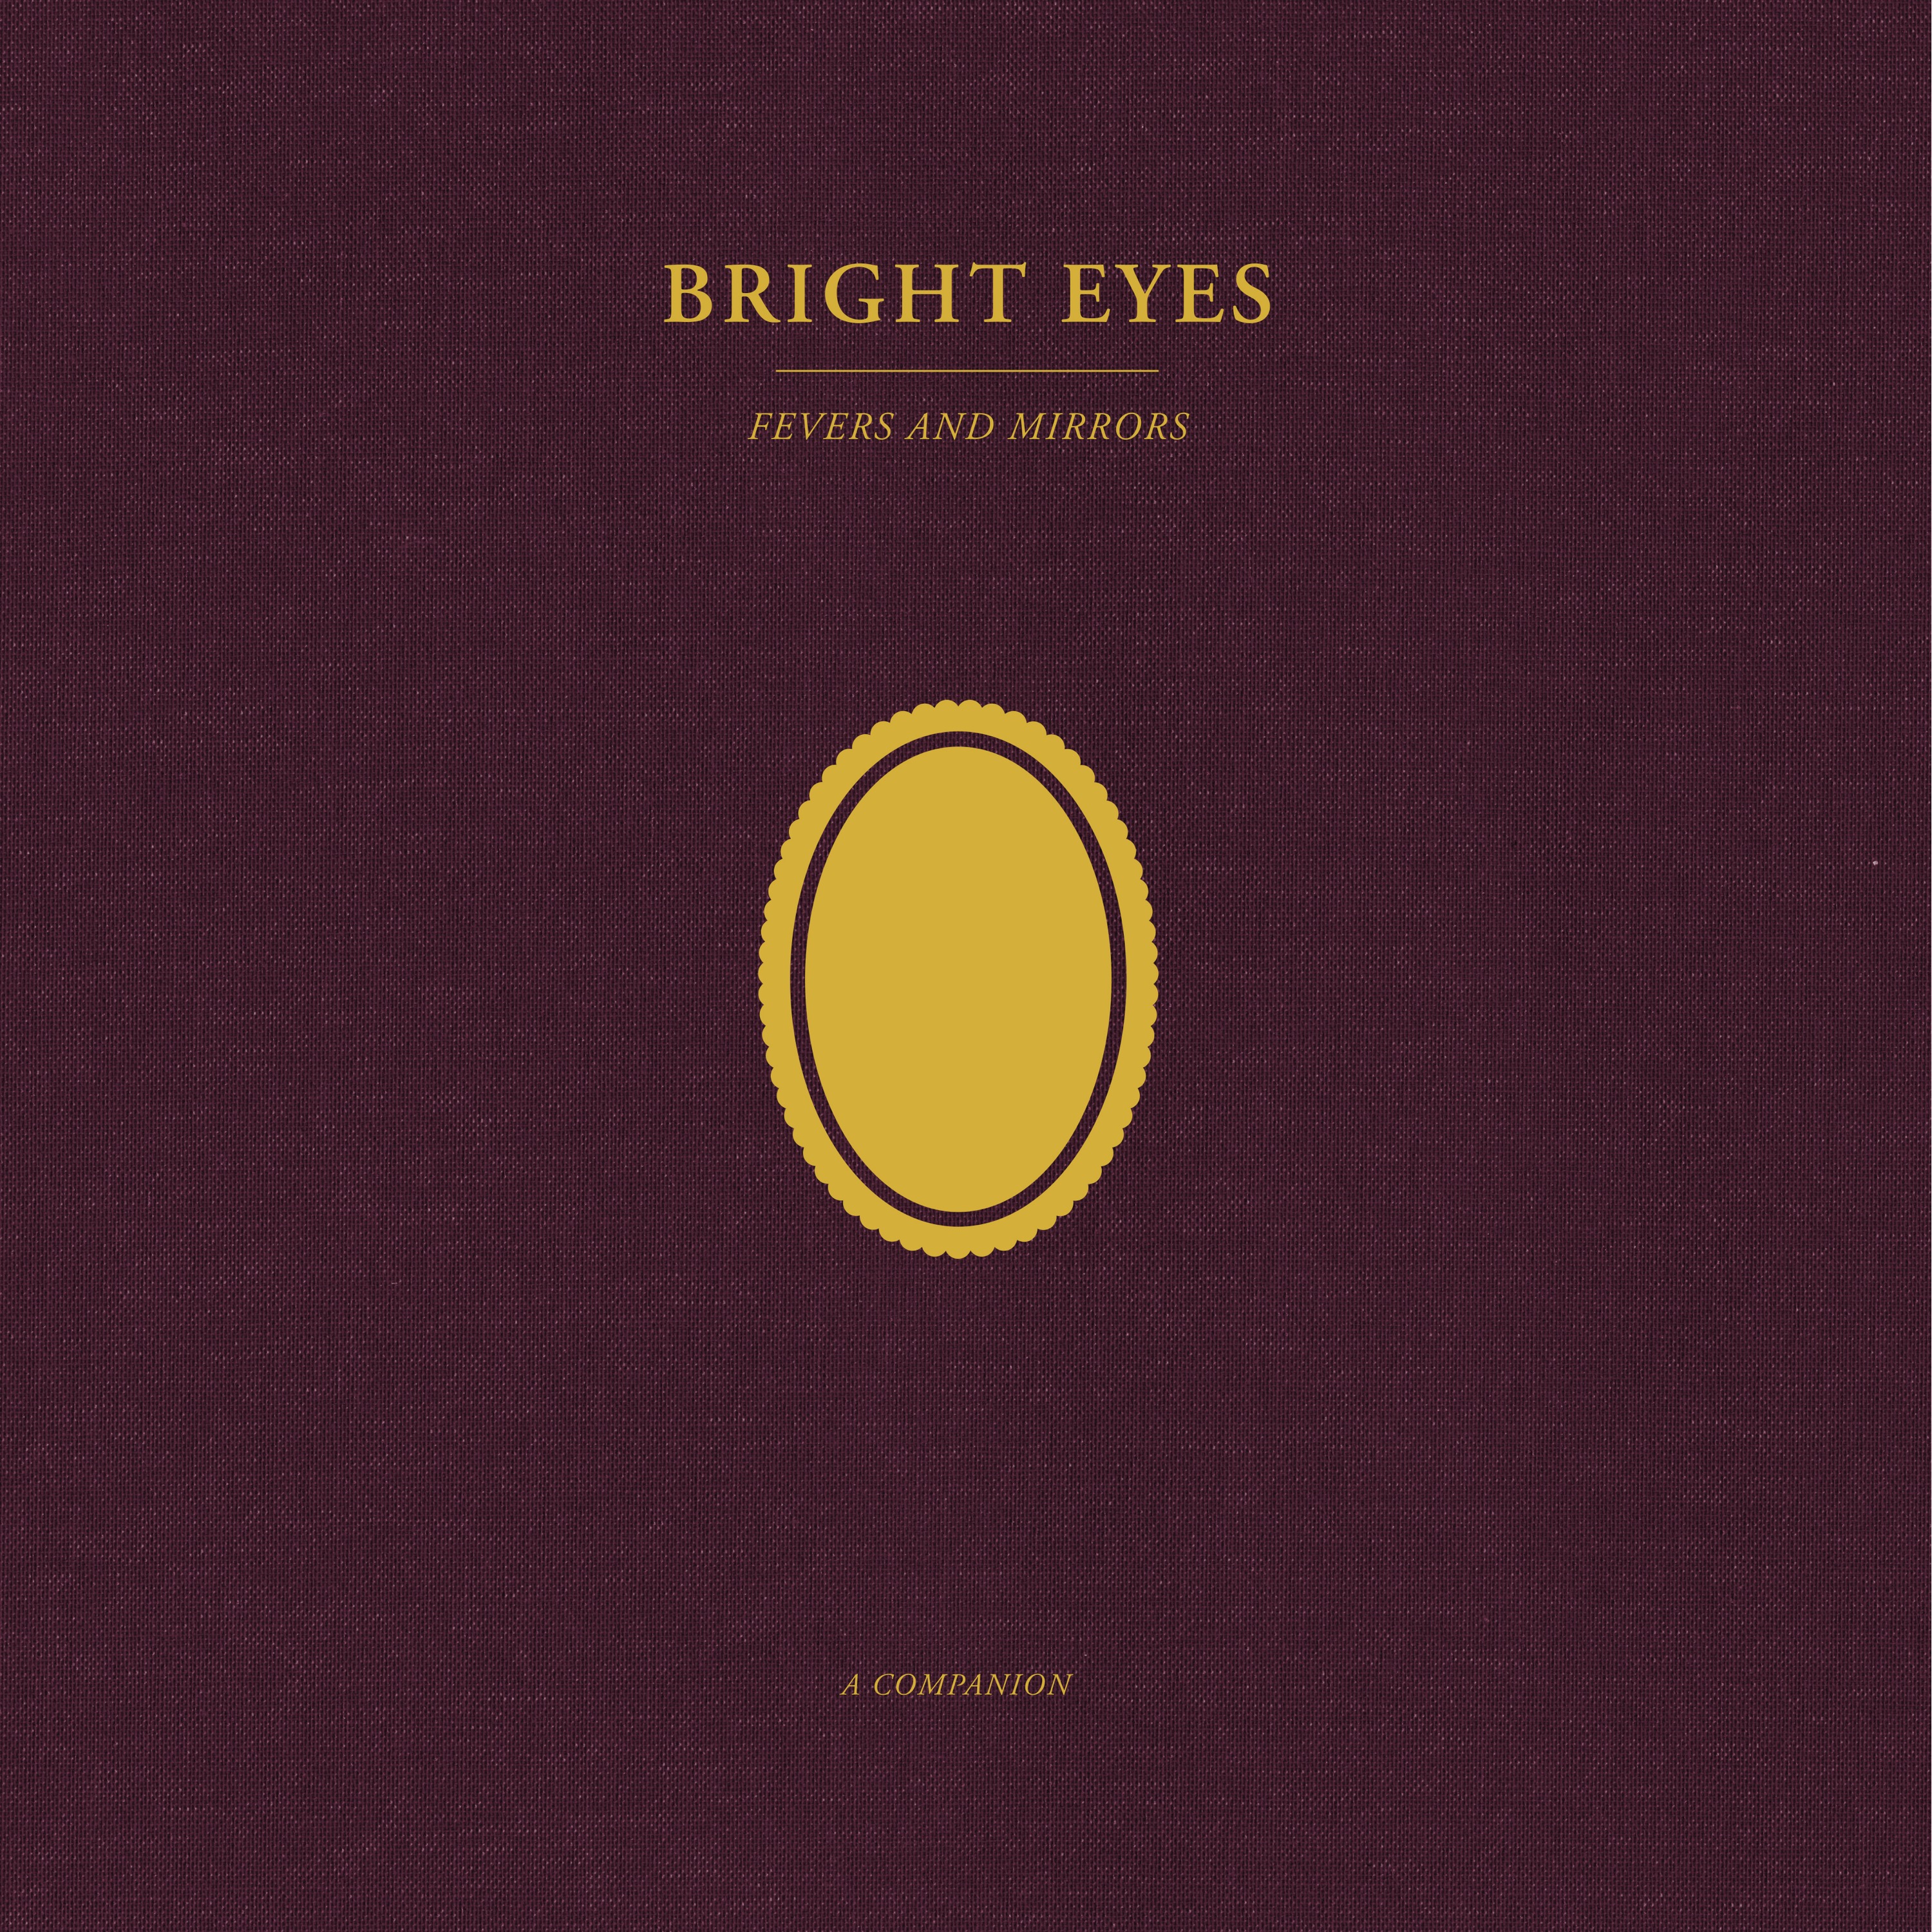 Bright Eyes - Fevers and Mirrors: A Companion (Op